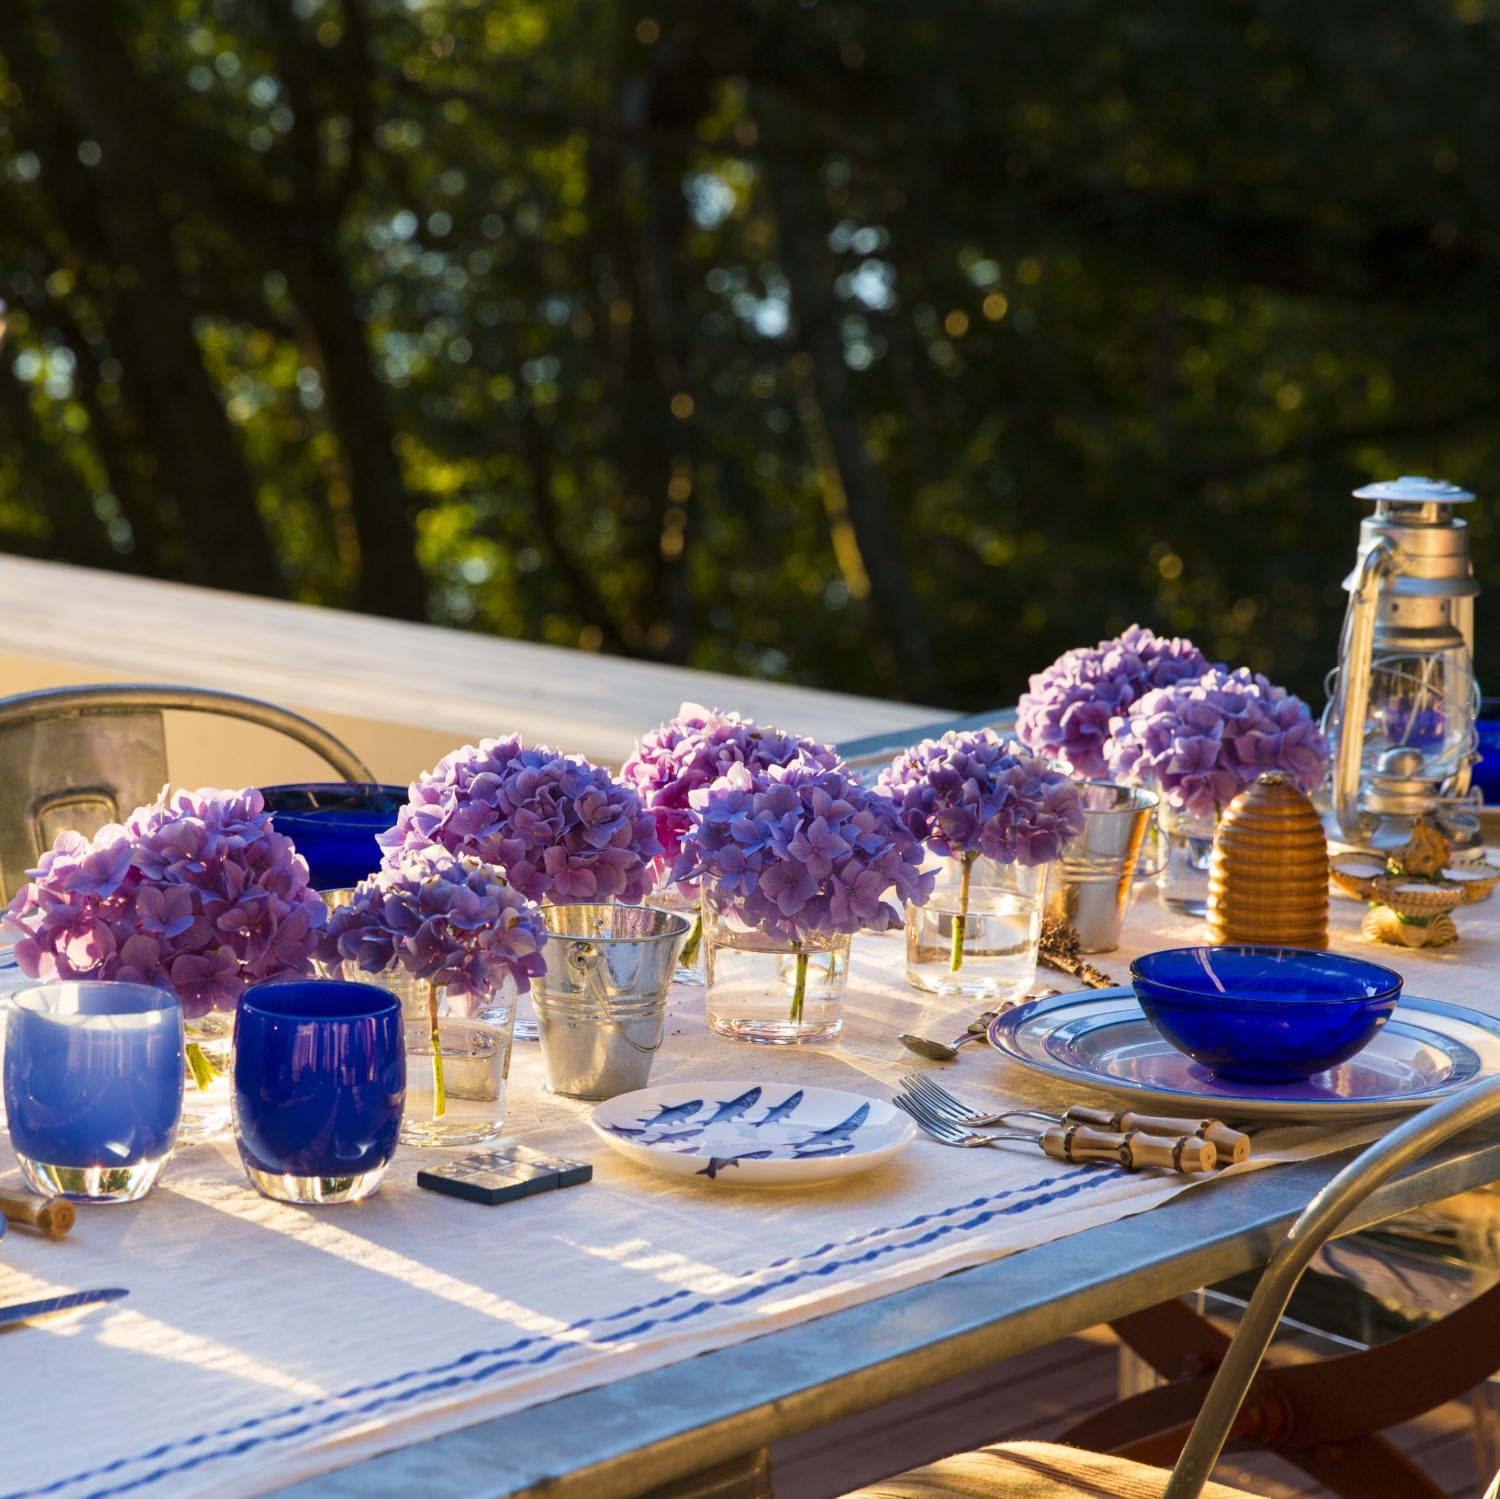 Ted Kennedy Watson set this outdoor table with a mix of cobalt china and glassware, and used single hydrangea blooms in simple glasses.